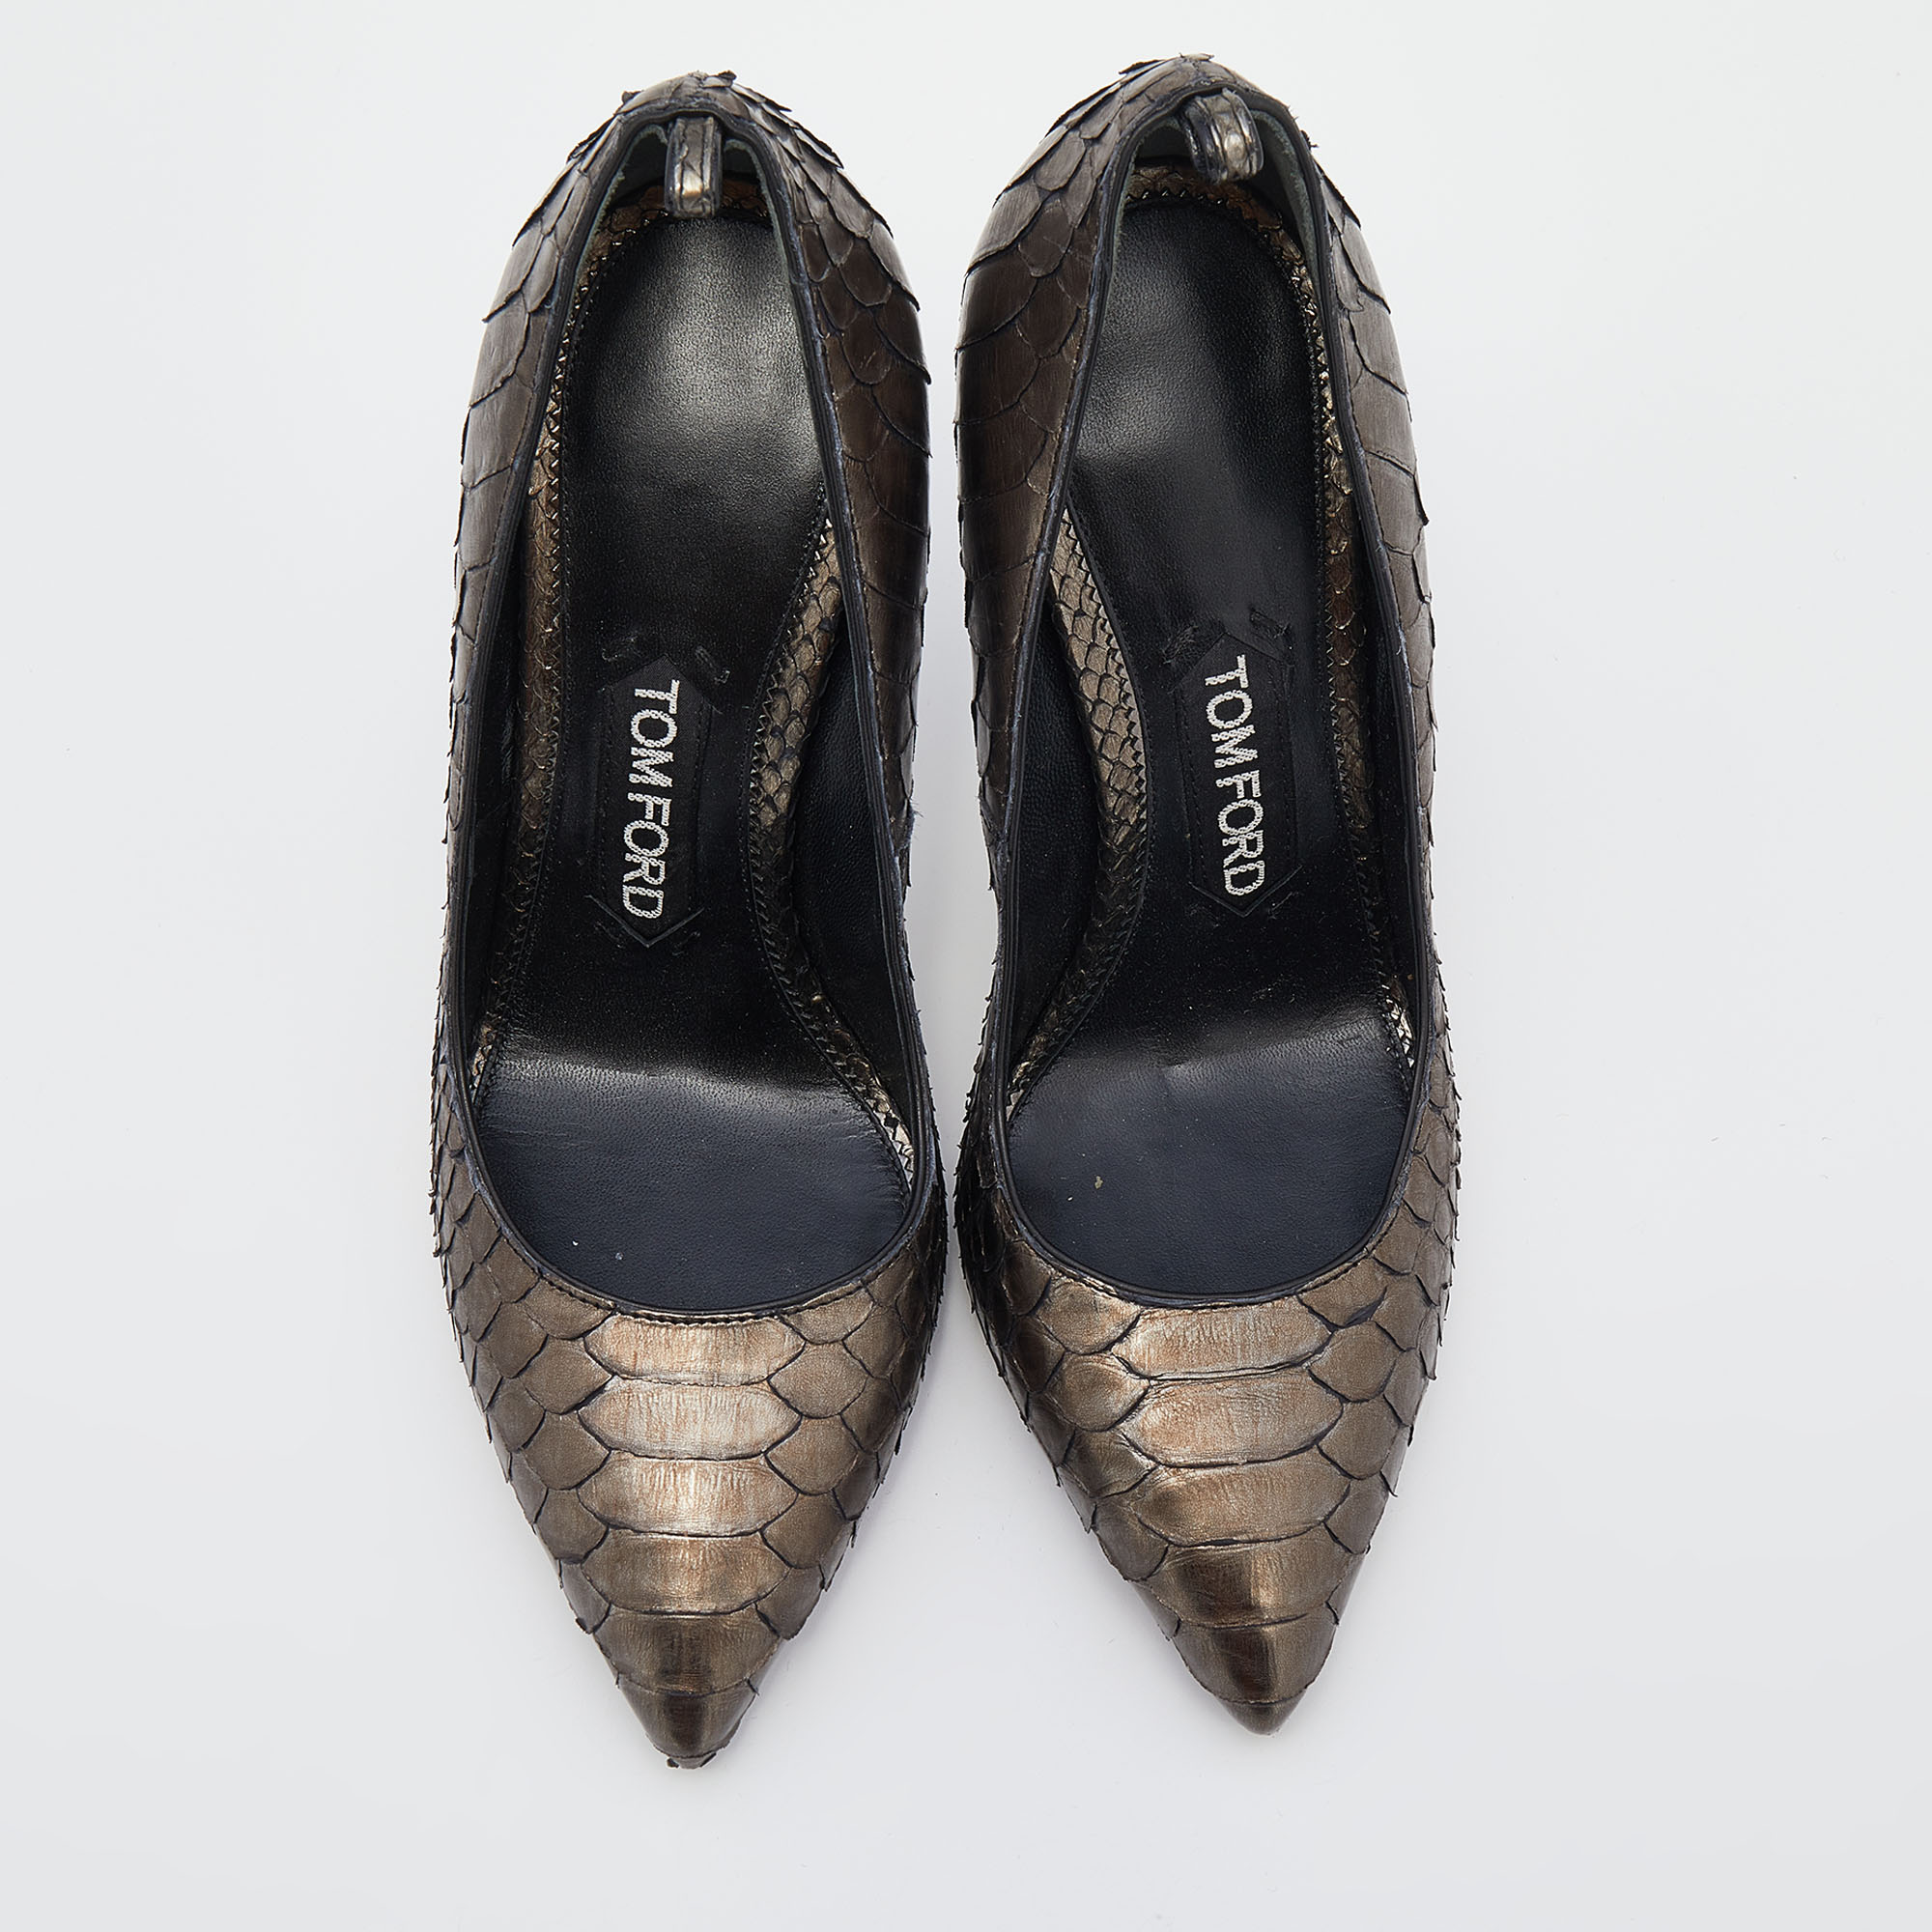 Tom Ford Metallic Grey Python Leather Pointed Toe Pumps Size 35